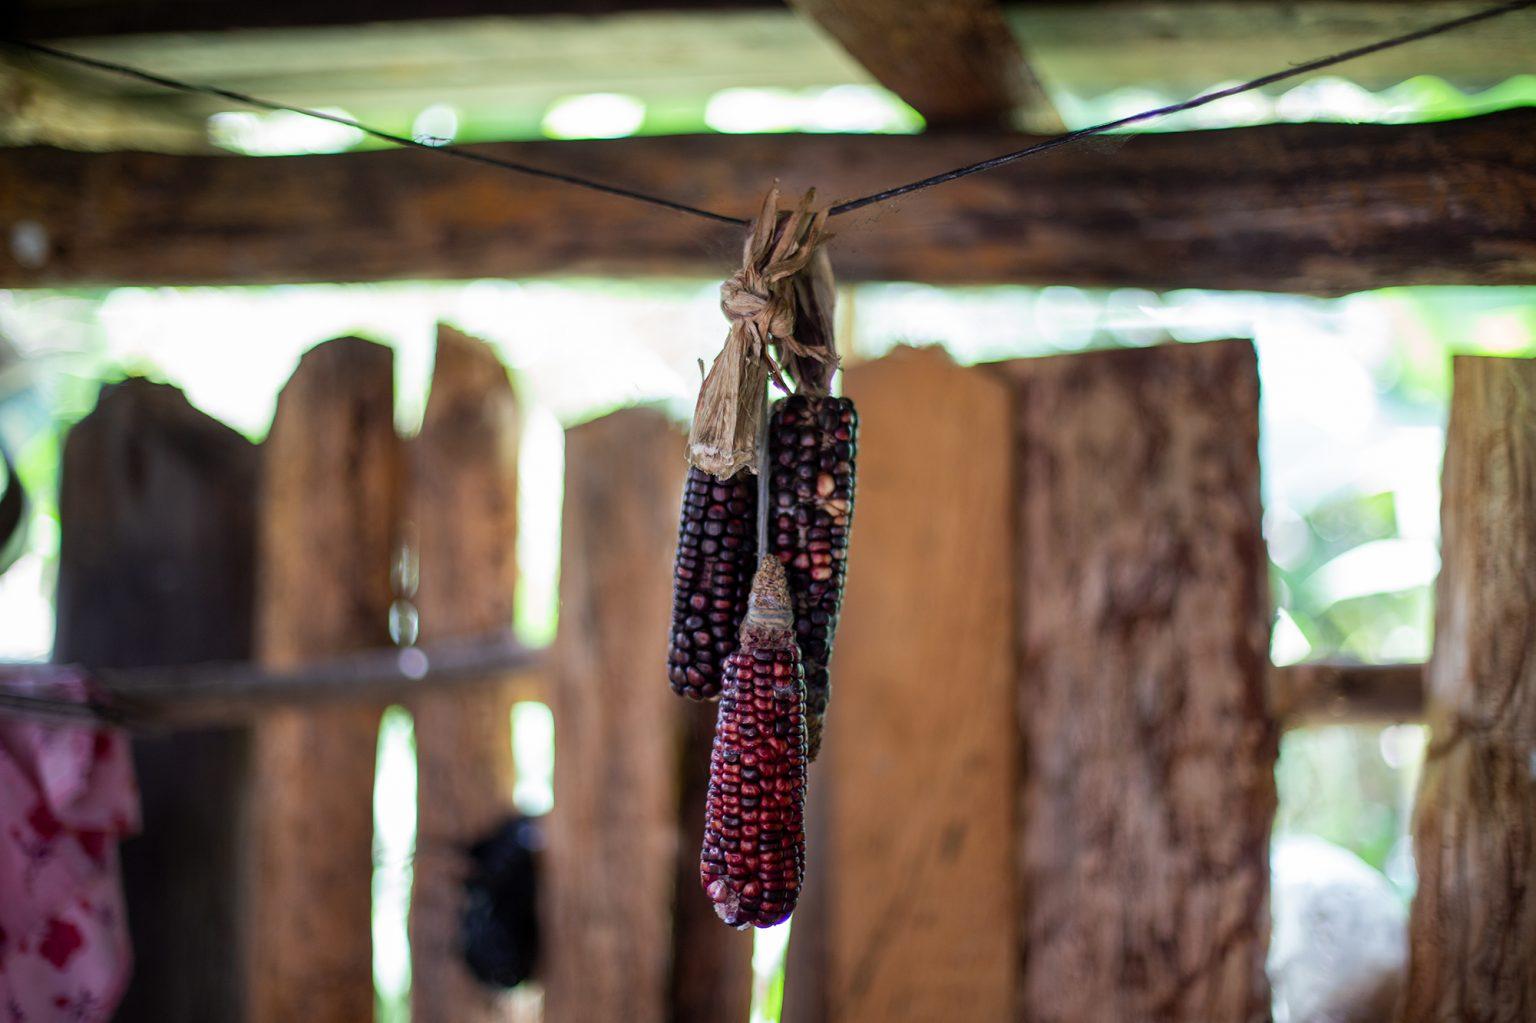 Three ears of maize hang from a rope in the kitchen of a home. Maize is one of the staple foods of the Lenca families from the mountains.  Opatoro, La Paz, August 8 2020. Photo: Martín Cálix